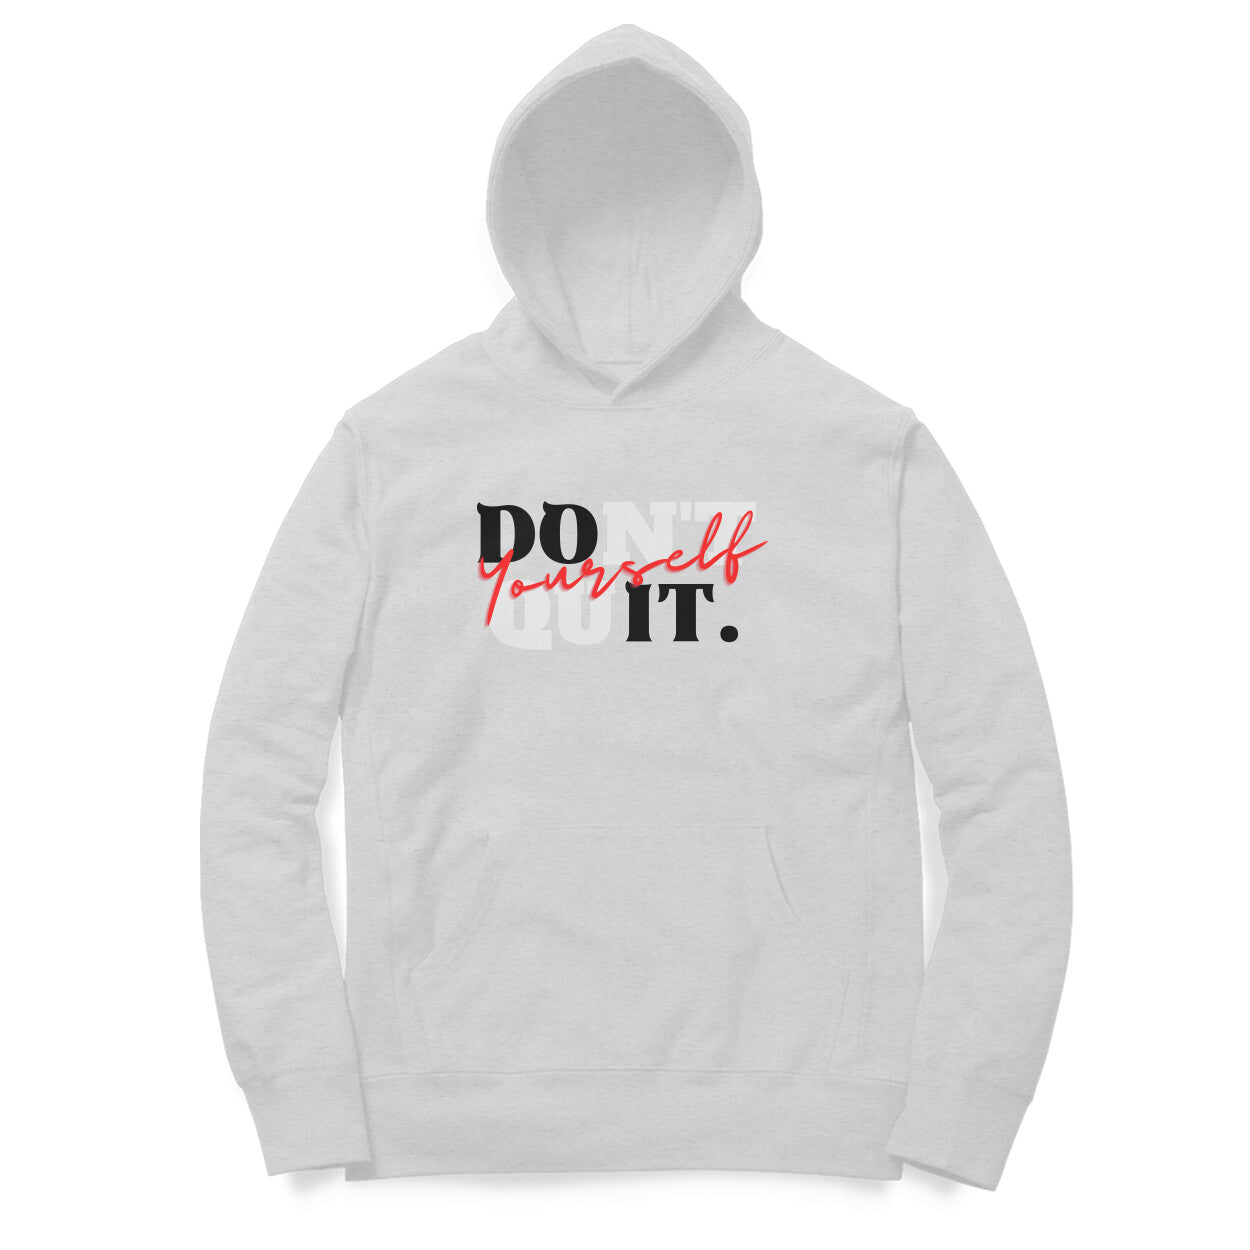 Don't Quit Yourself Hoodies